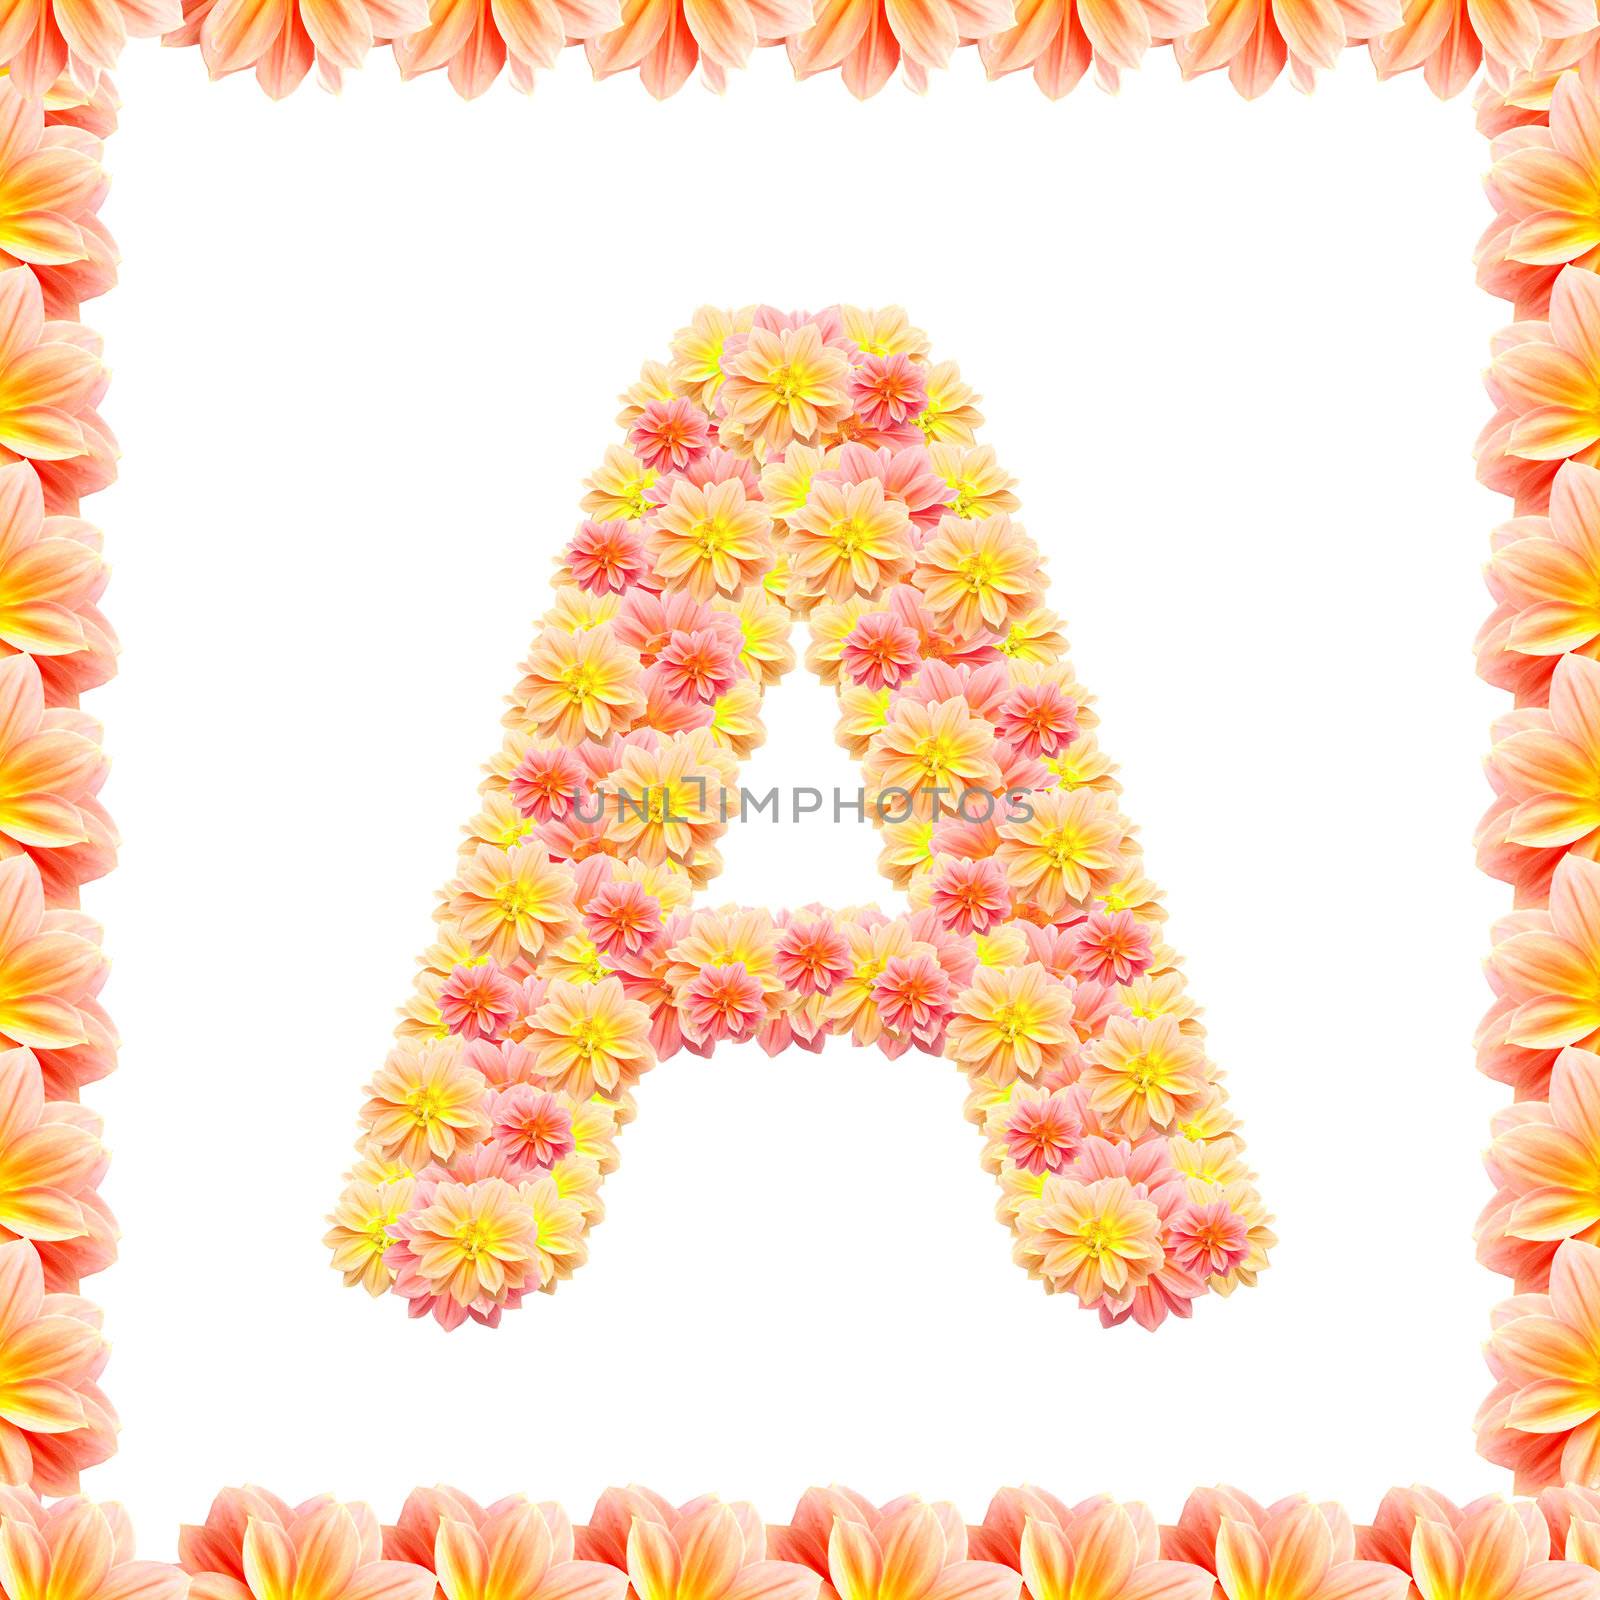 A,flower alphabet isolated on white with flame